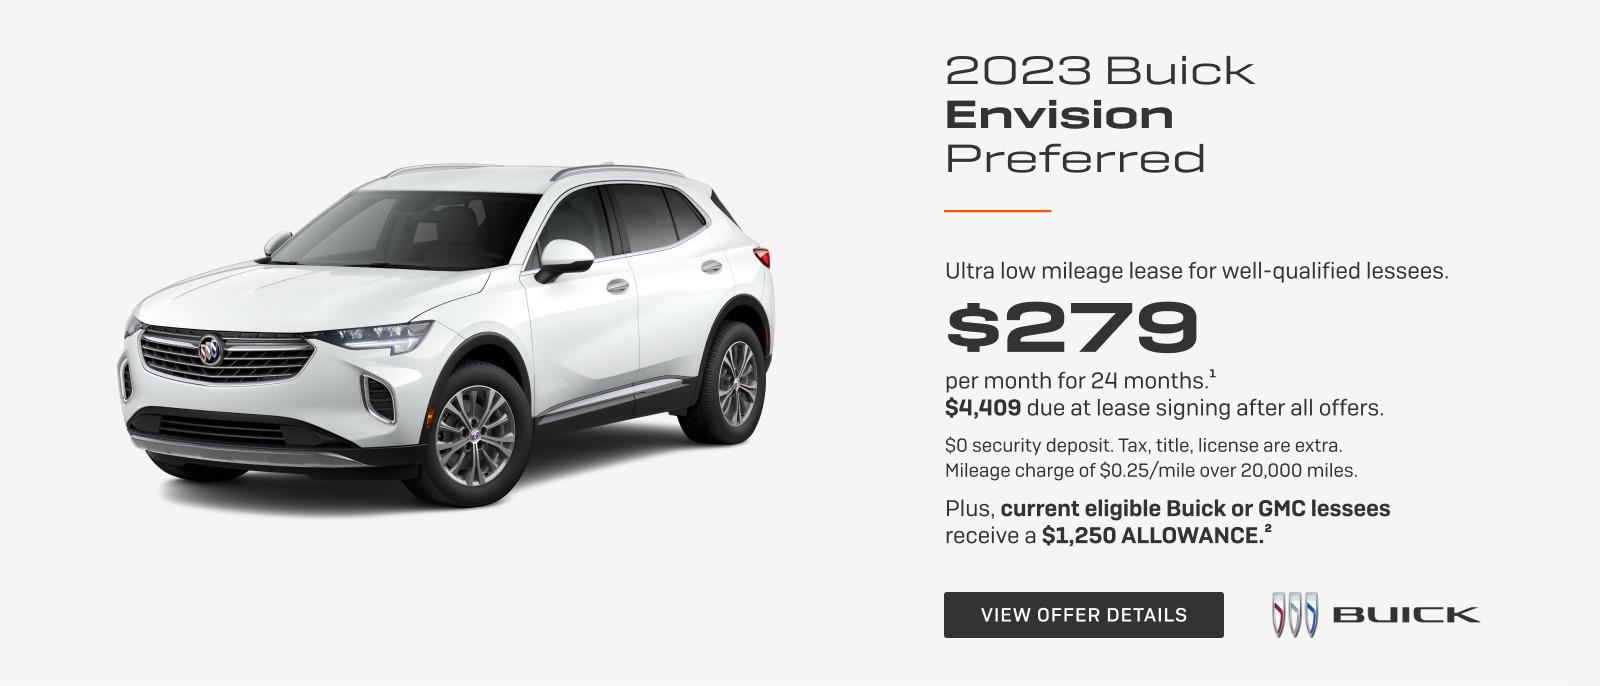 Ultra Low-Mileage Lease for well-qualified Lessees. $279 per month for 24 months. $4409 due at lease signing after all offers. $0 security deposit. Tax, title, license are extra mileage change of $0.25 per miler over 20,000 miles. Plus current eligible Buick or GMC lessees receive a $1.250 allowance.